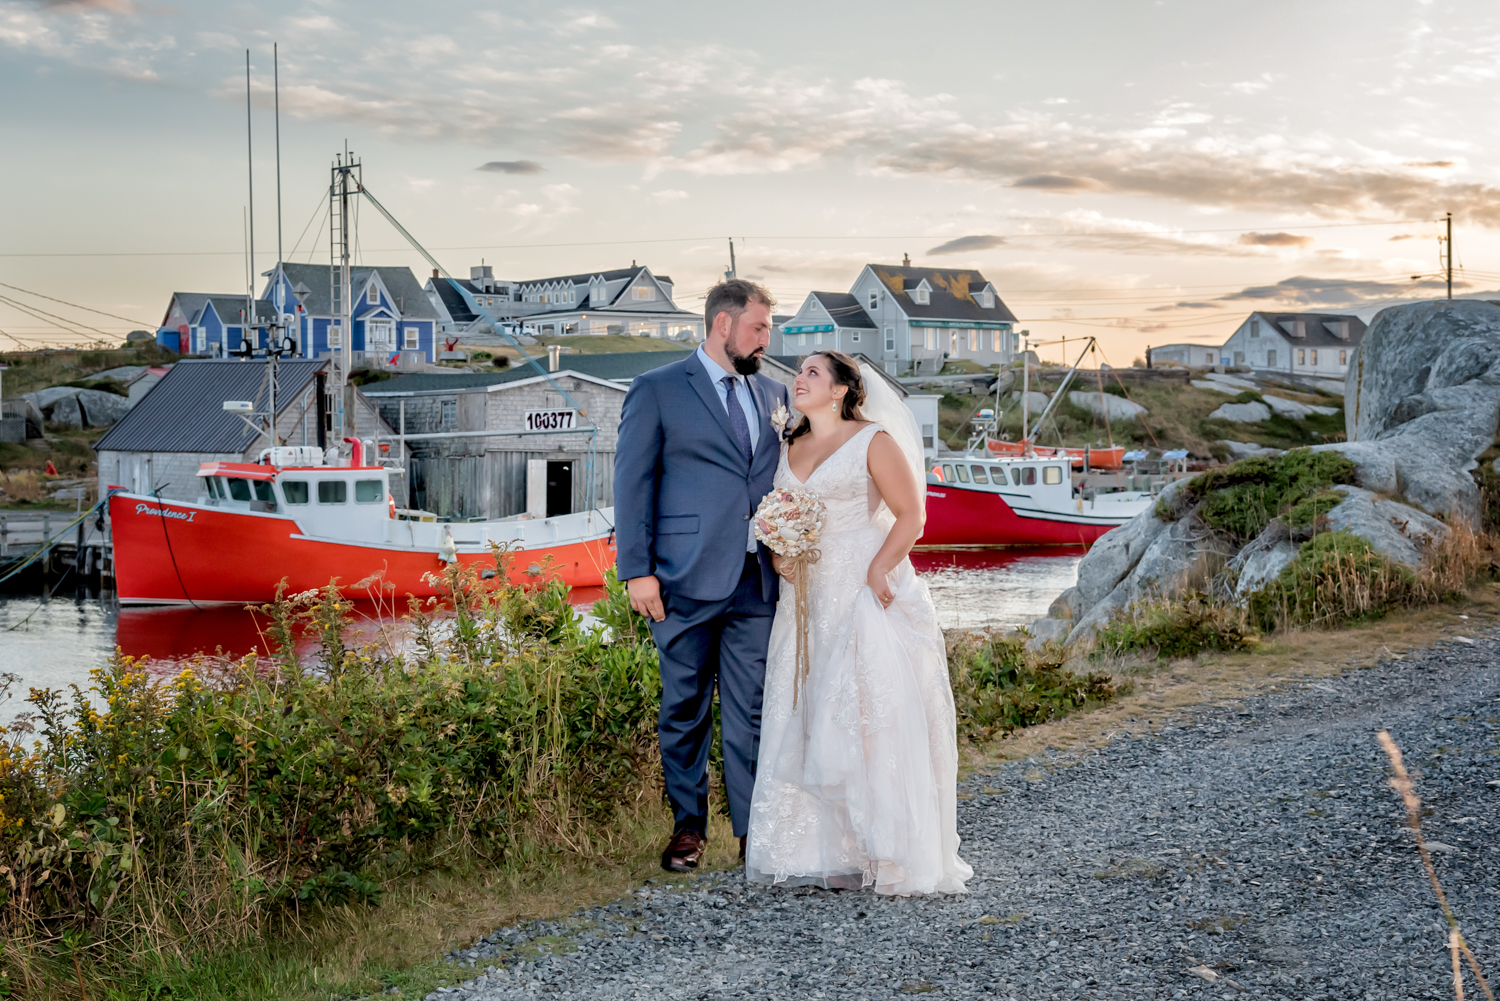 A bride and groom pose for wedding photos infront of the boats at Peggys Cove in Nova Scotia.